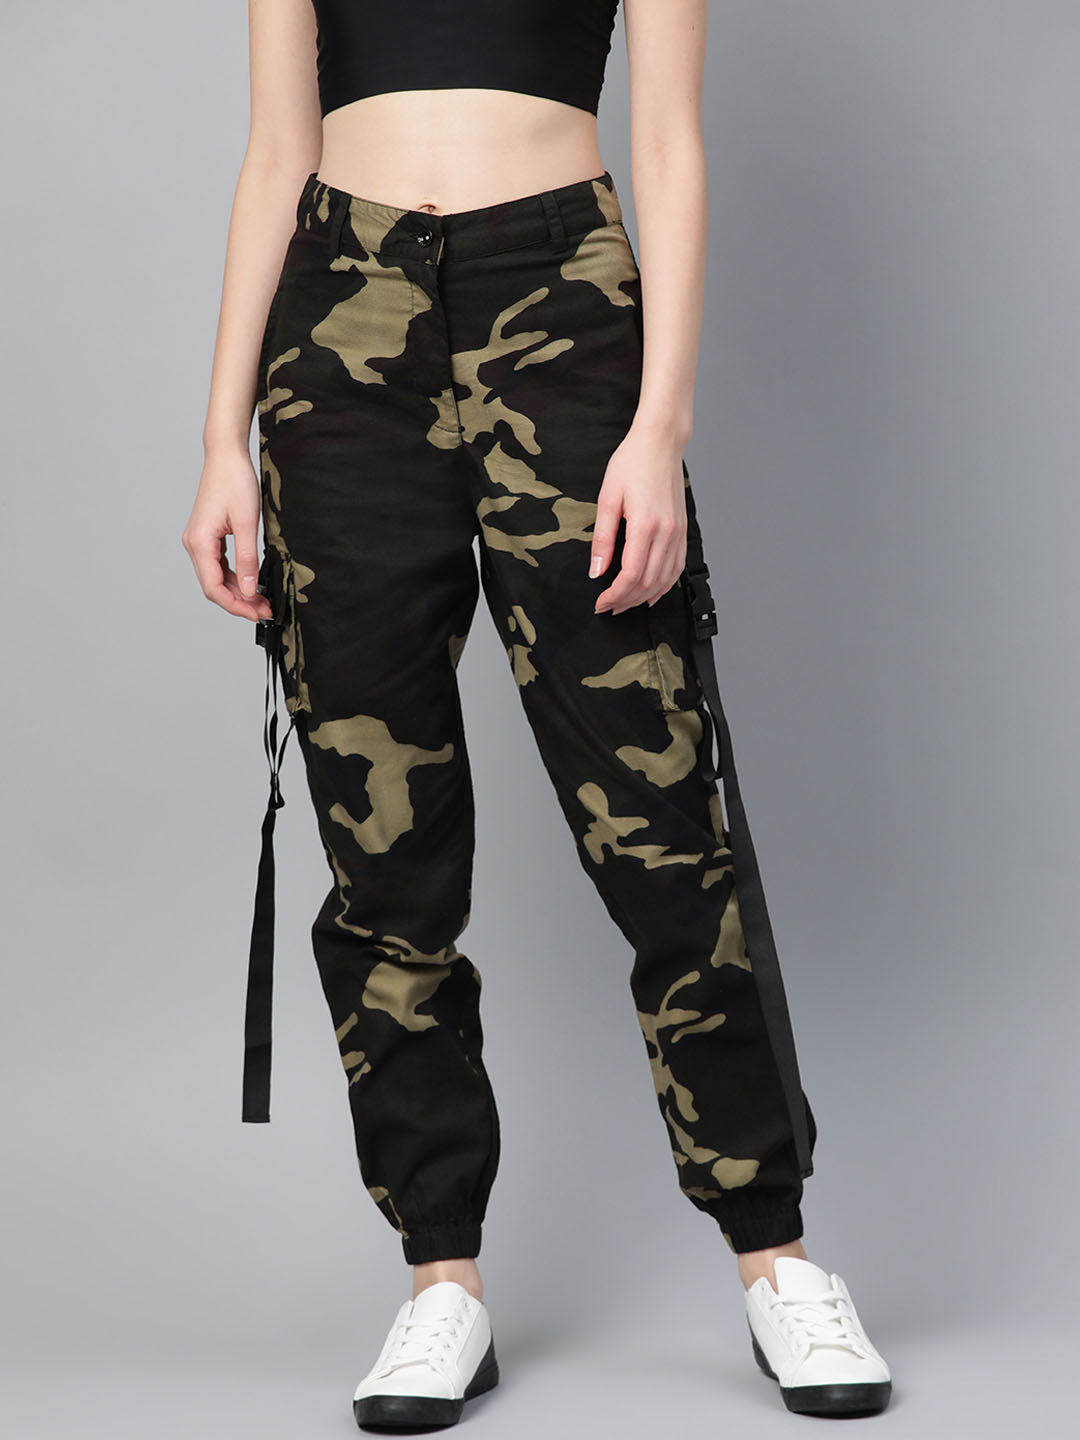 Camo Pants Outfit Winter Women  Sneaker outfits women Fall fashion  outfits Outfits tenis